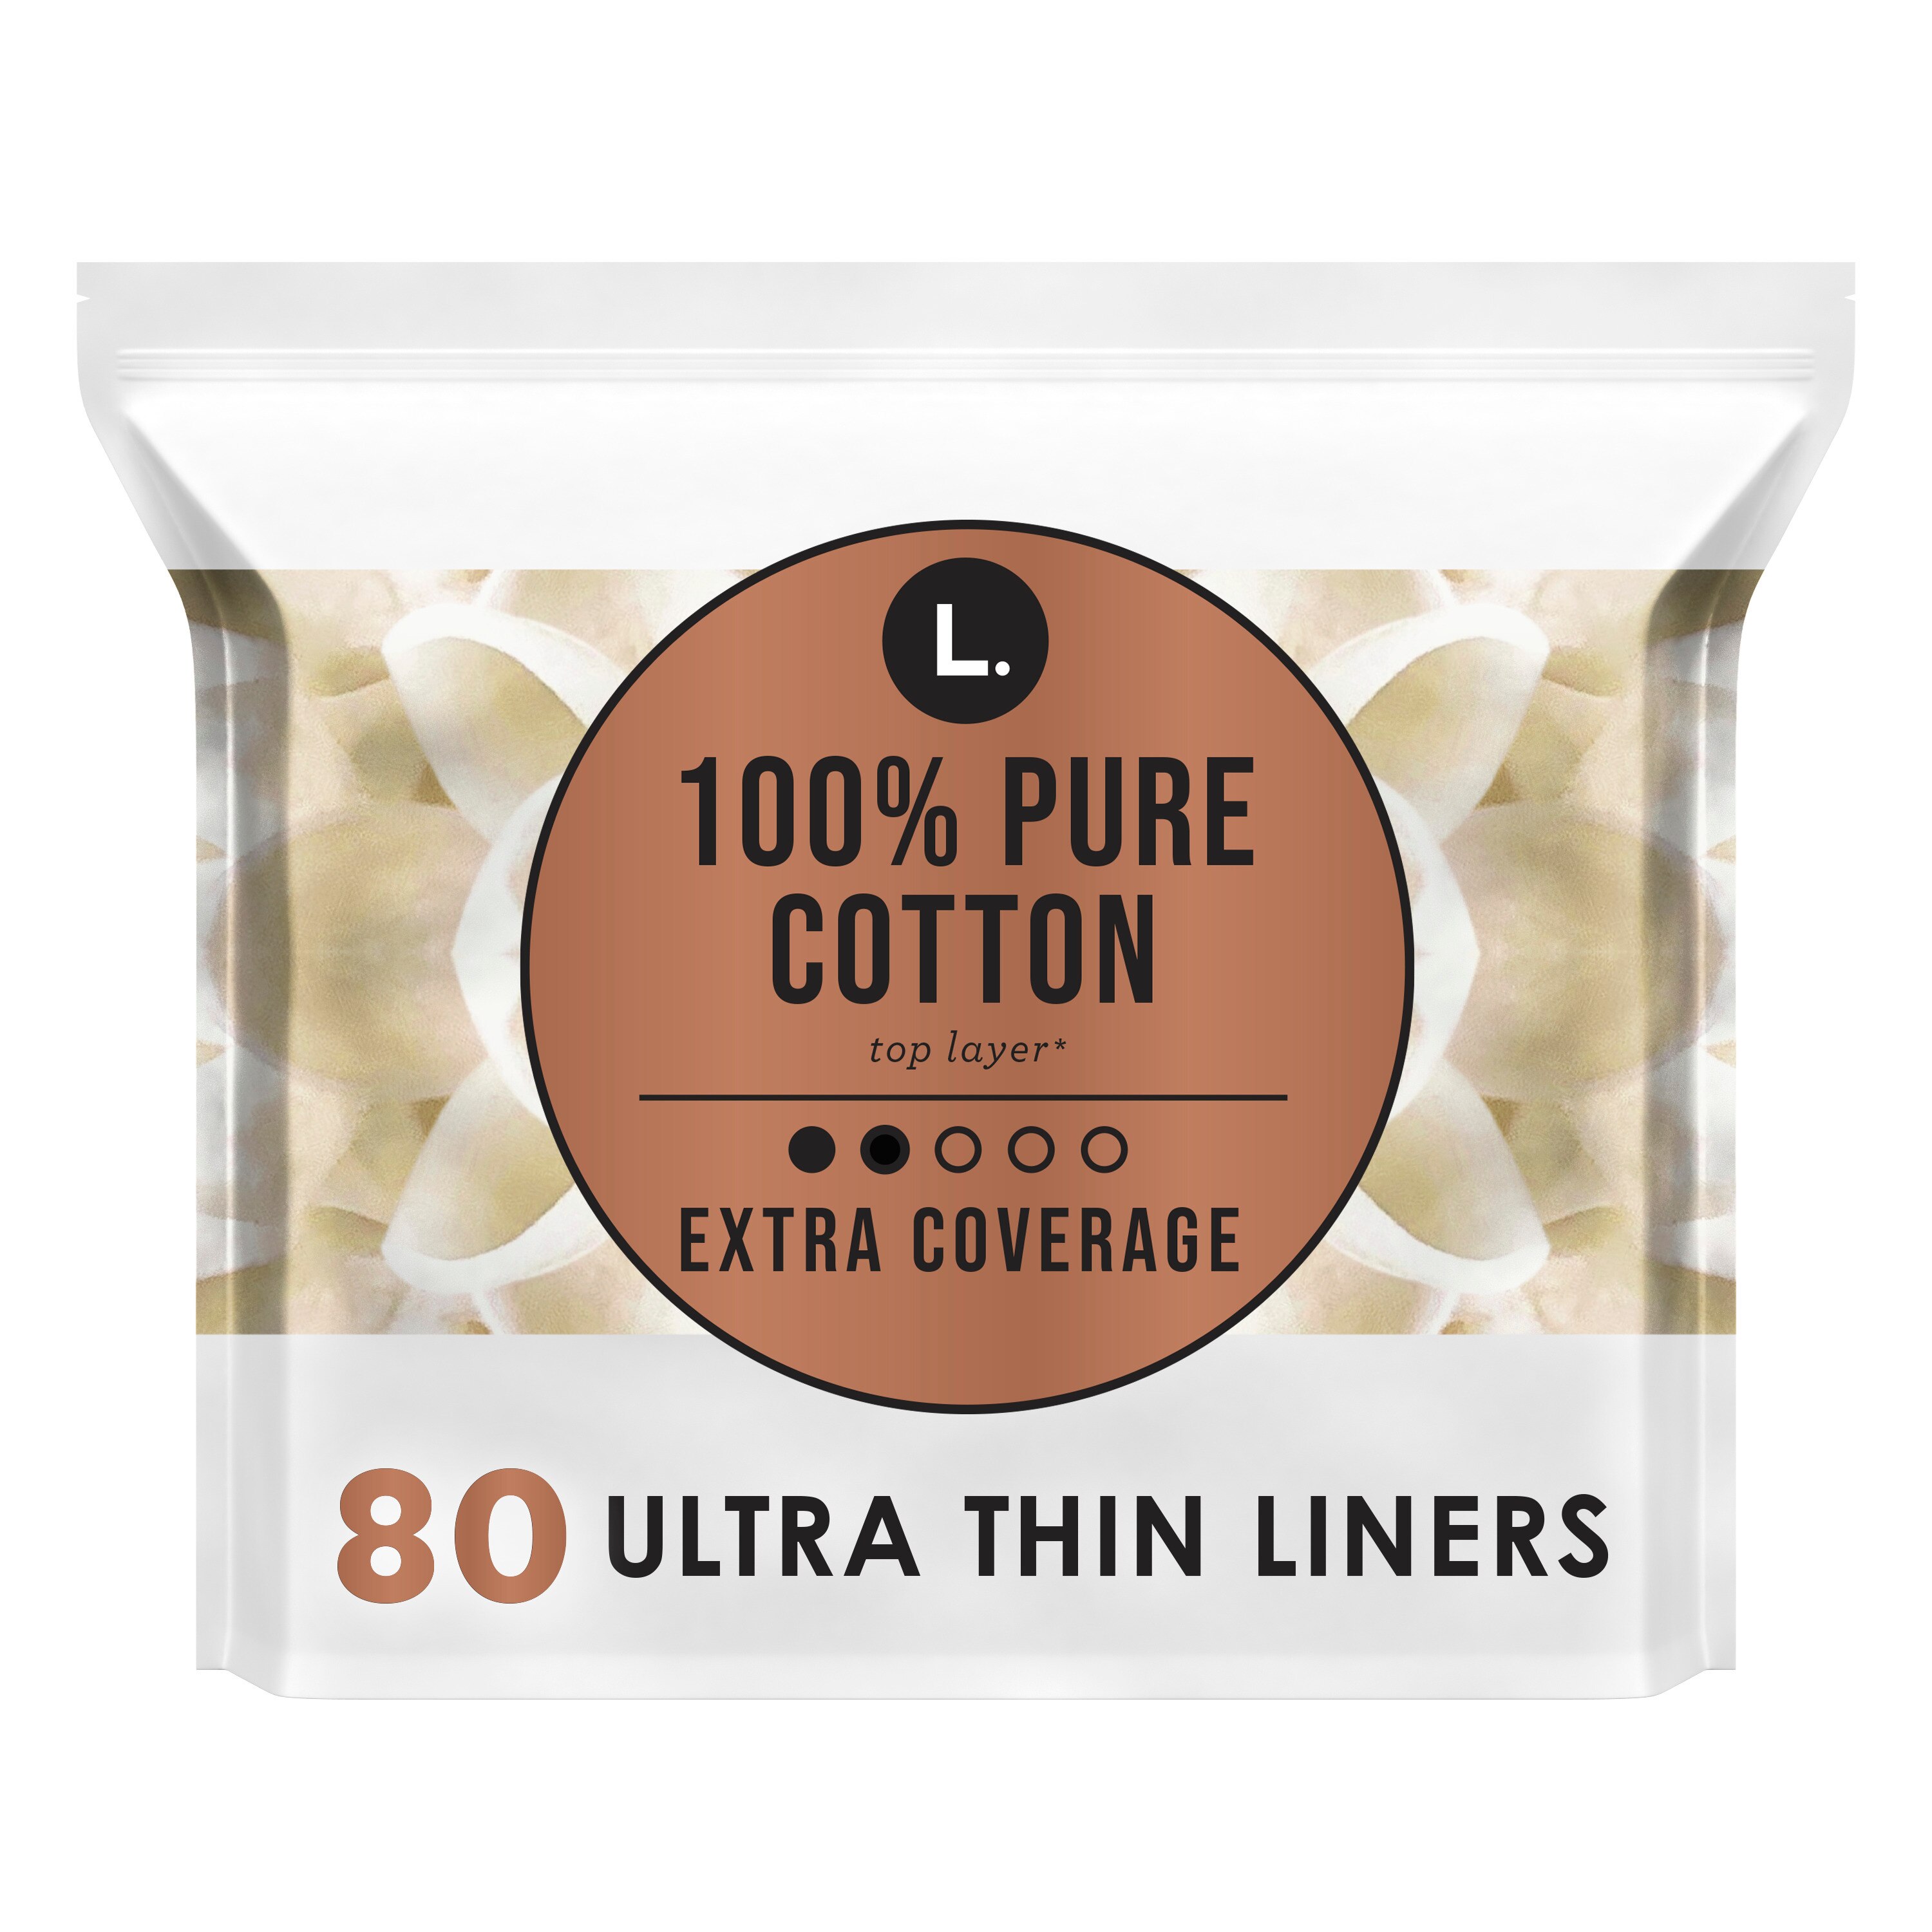 L. Chlorine Free Ultra Thin Liners, Extra Coverage, 80 CT